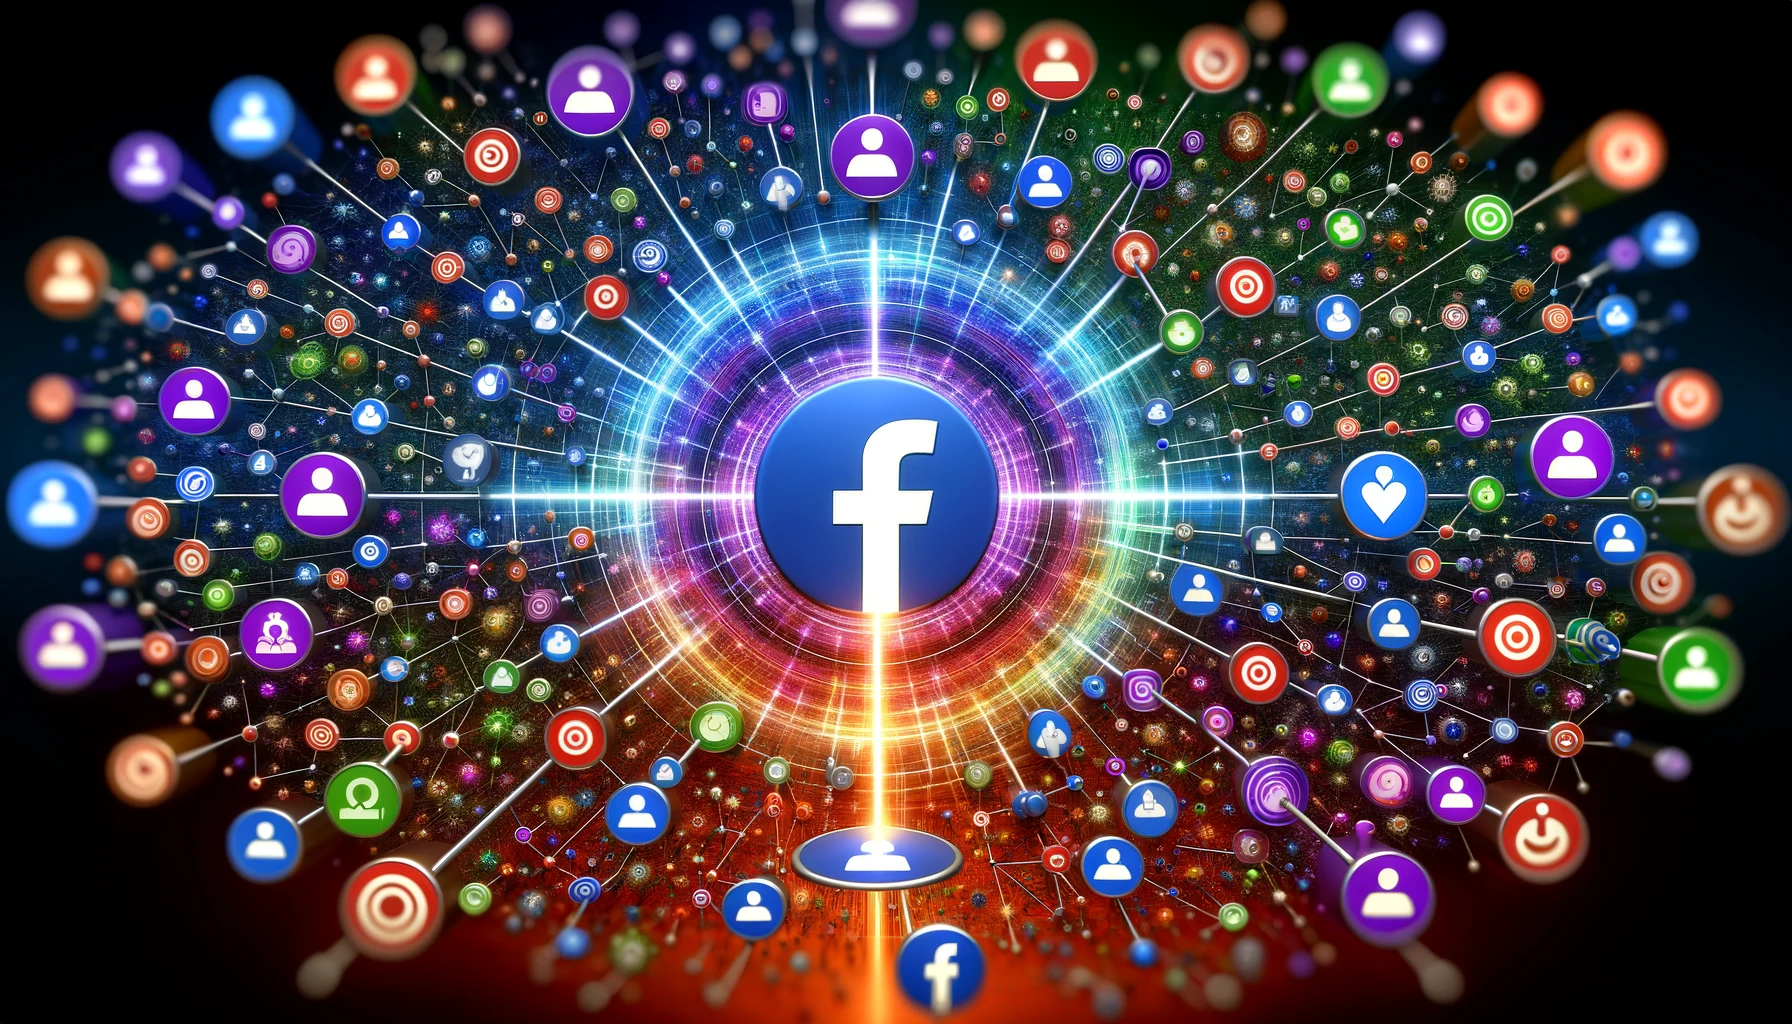 Visualization of Facebook Ad Targeting with vibrant nodes representing diverse user demographics and interests funneling into a central targeted ad symbol.